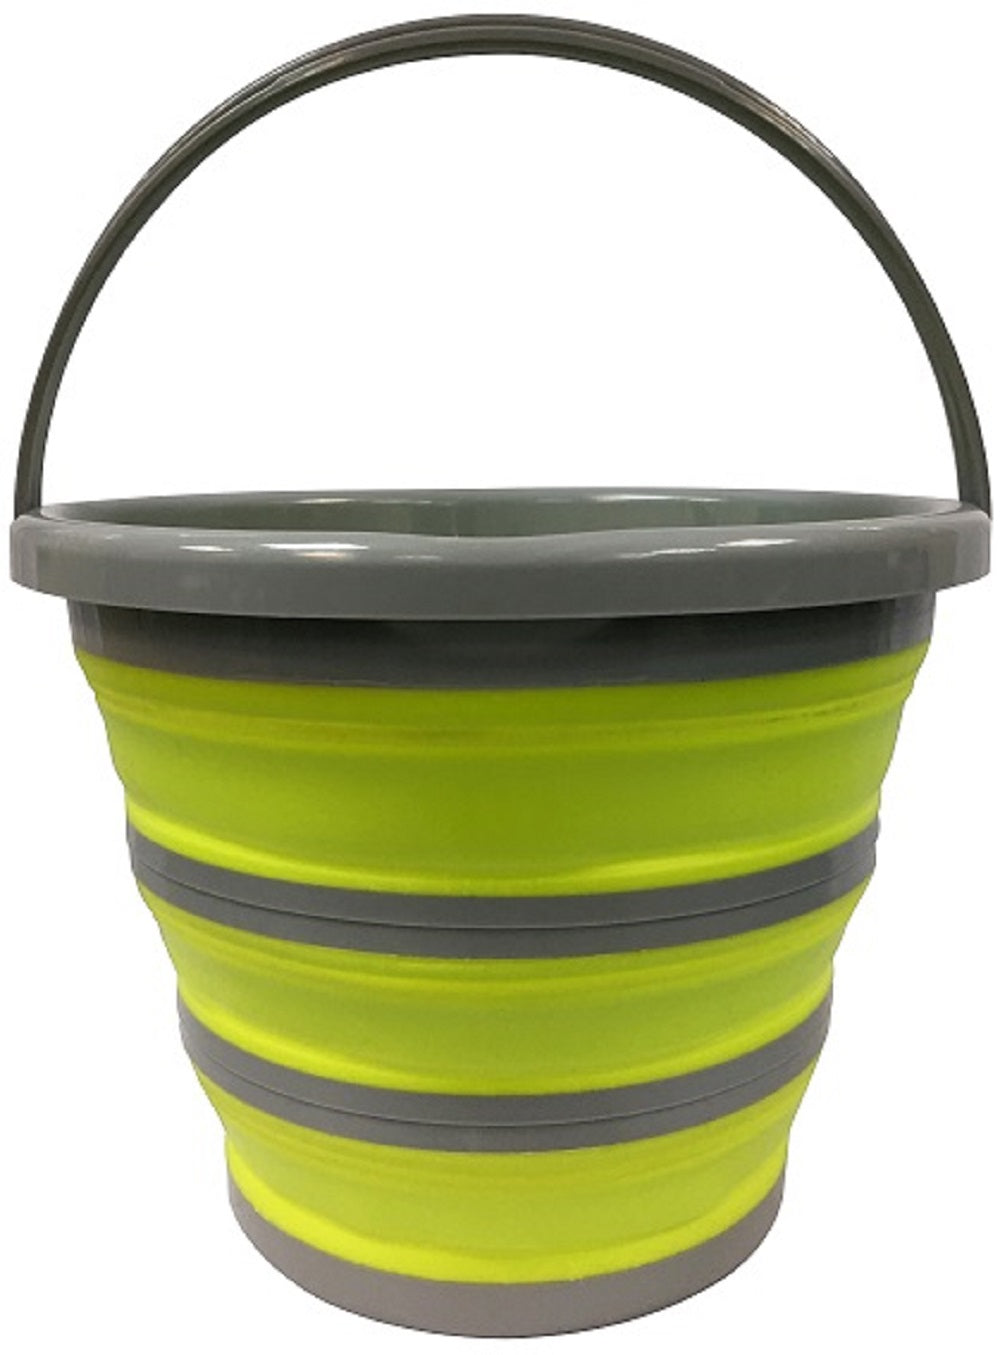 Collapsible Garden & Storage Bucket by Ultimate Innovations (4 Gallon)